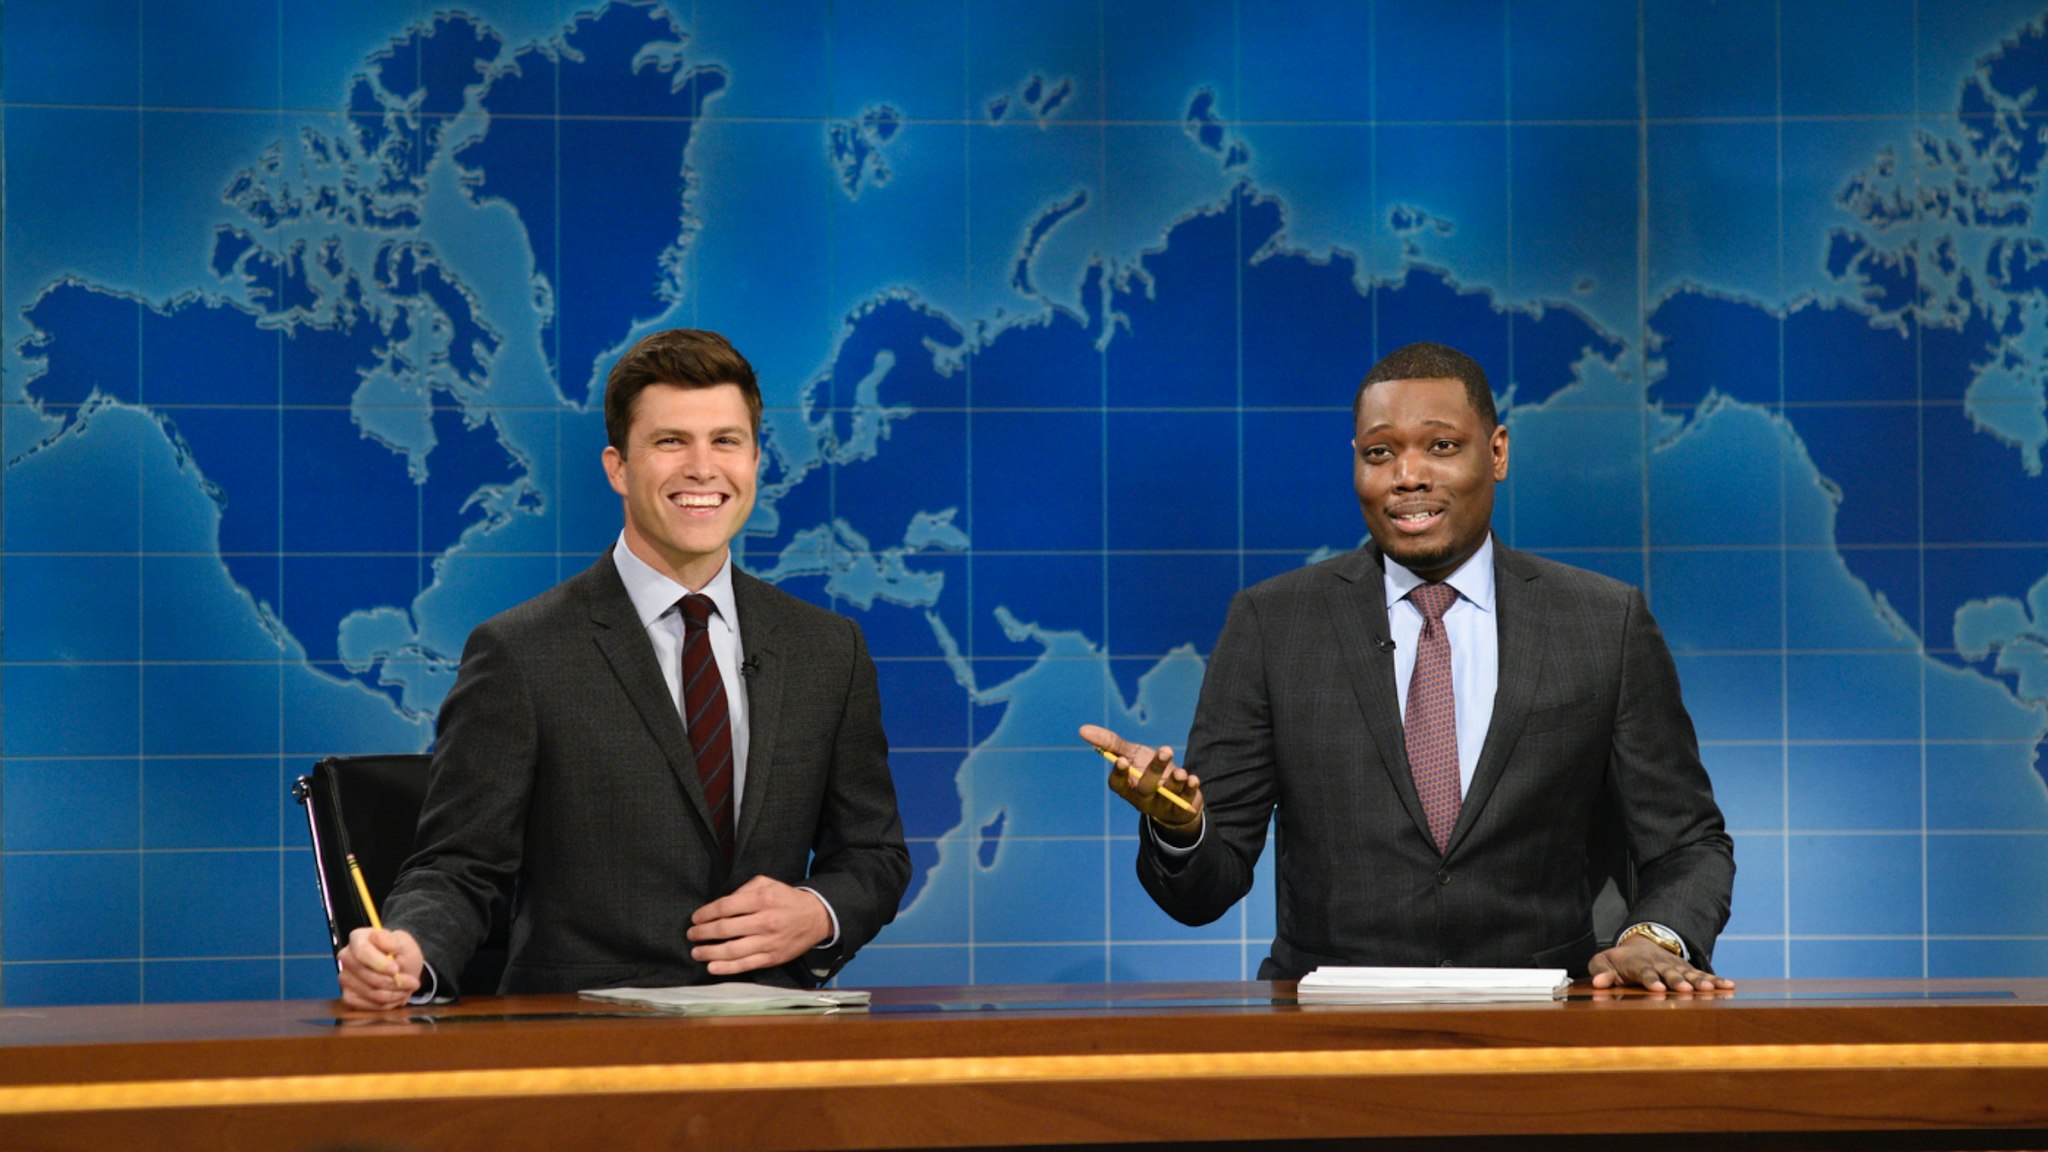 Colin Jost, Michael Che from Studio 8H on August 10, 2017.